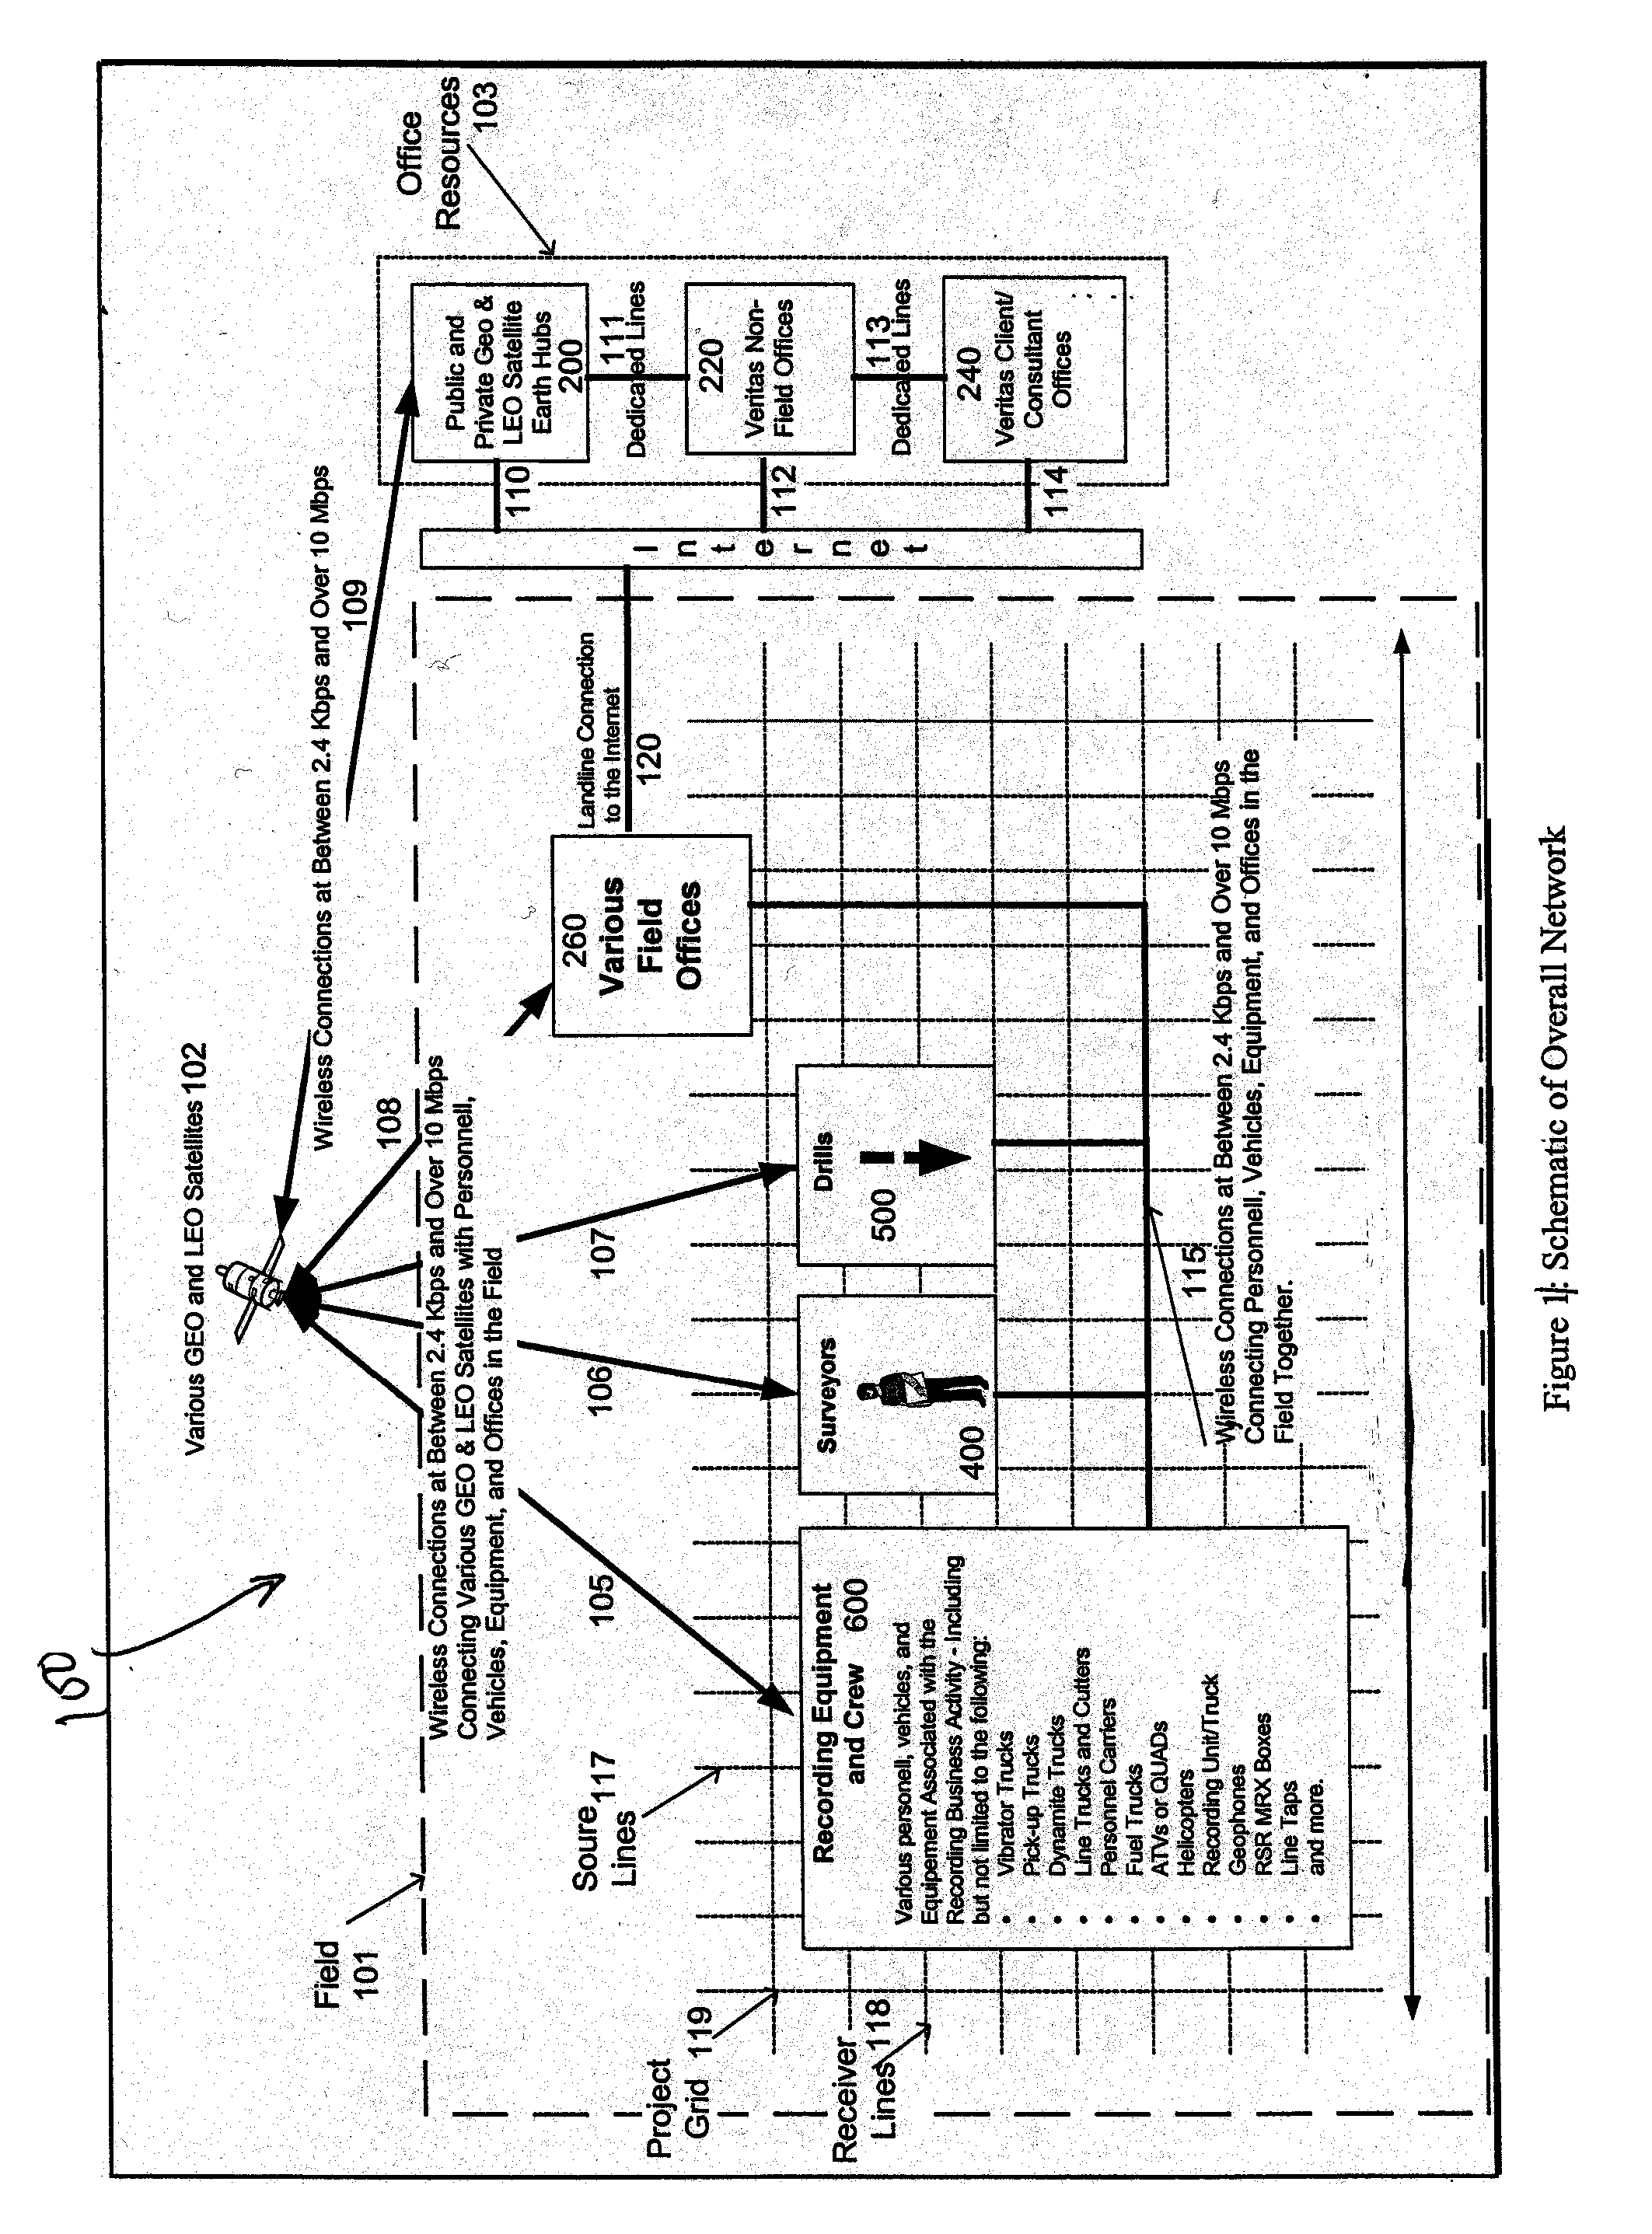 Satelite-based seismic mobile information and control system